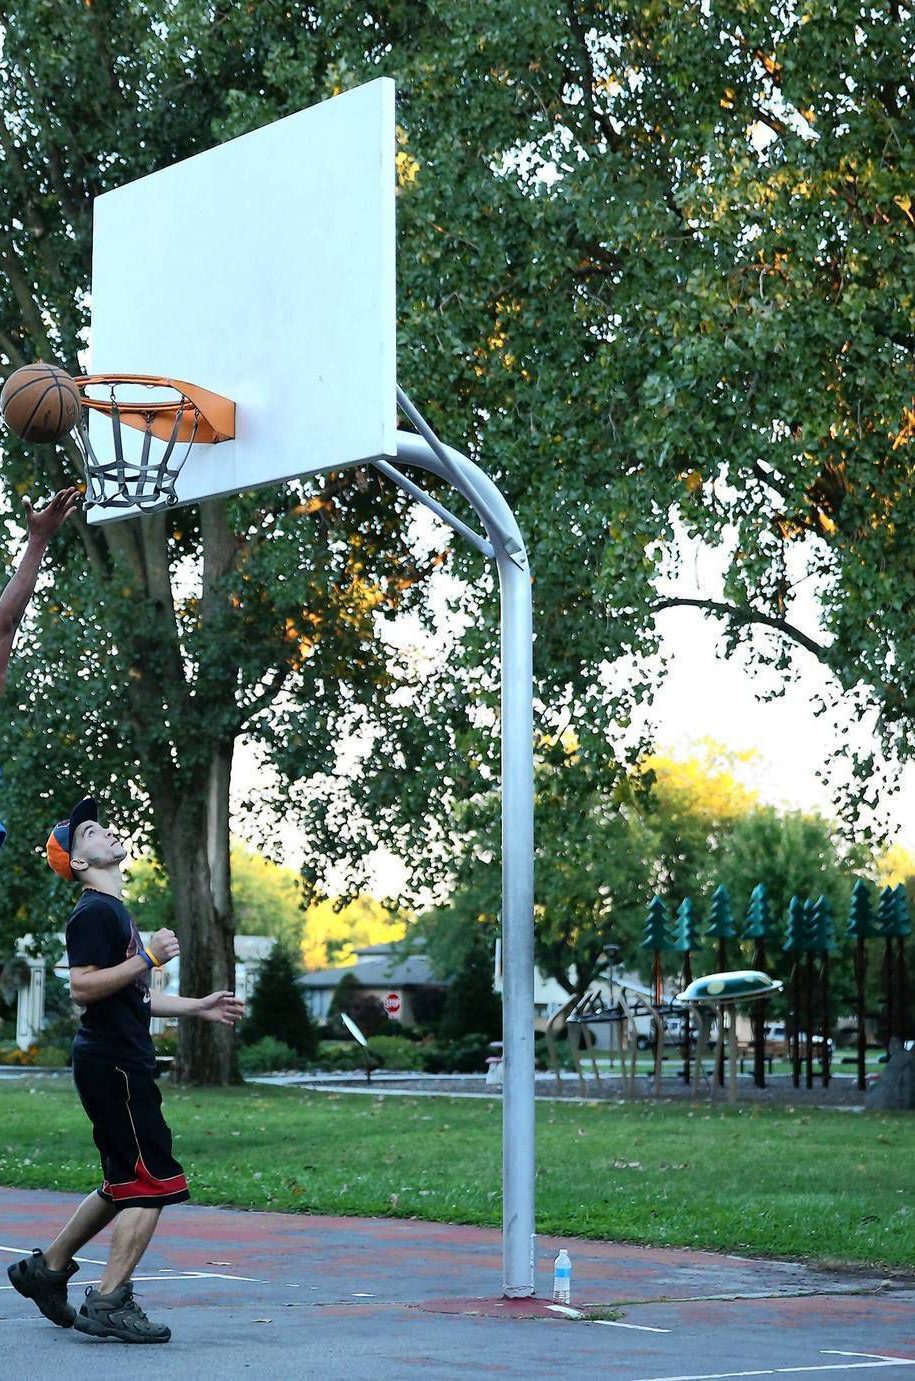 Youth Basketball: Age-Appropriate Rim Height, Skill Development